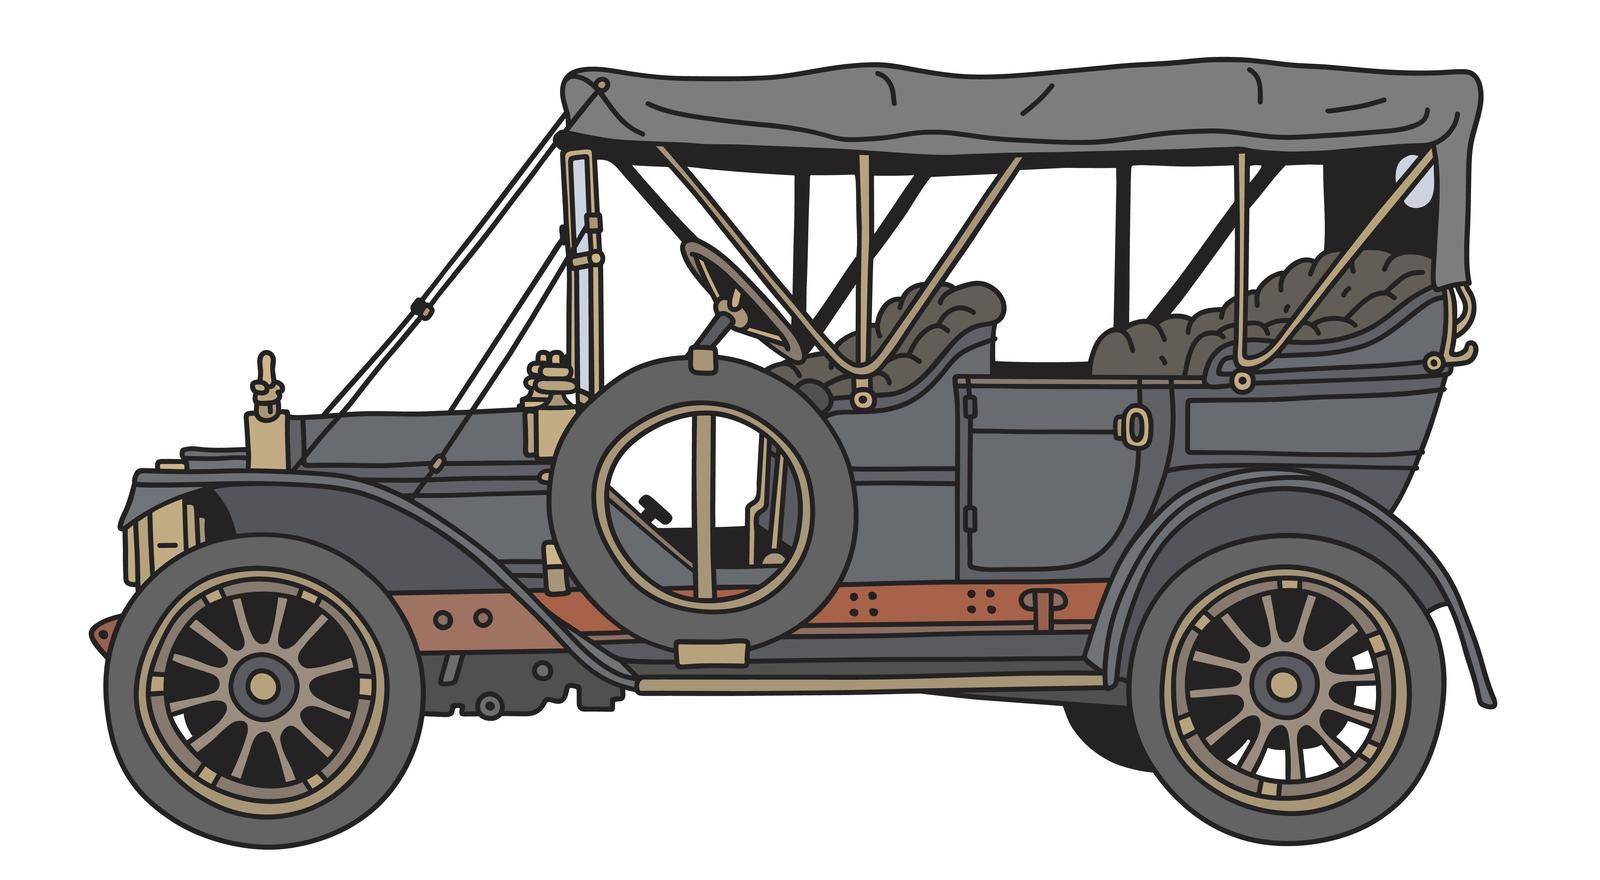 The vectorized hand drawing of a vintage black car